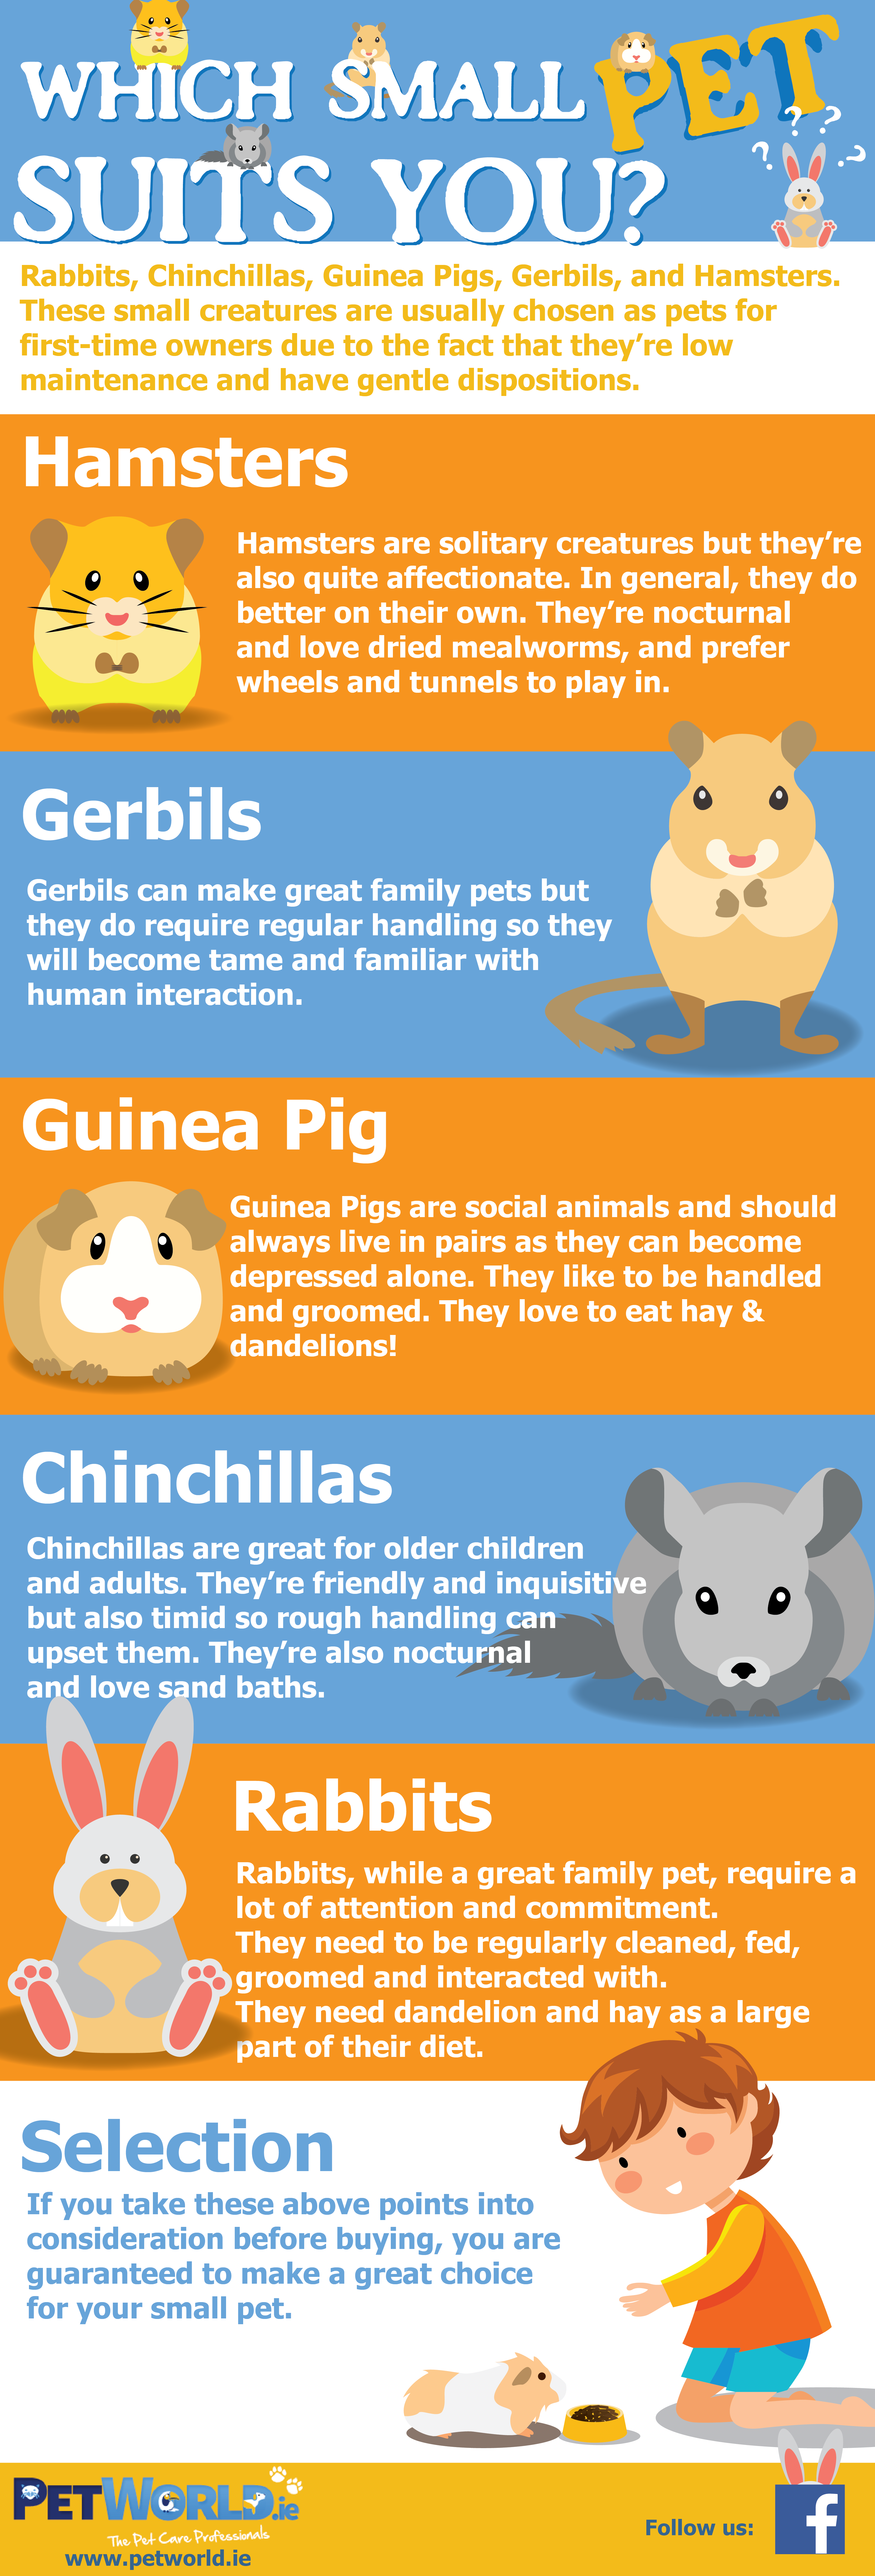 which small pet suits you infographic